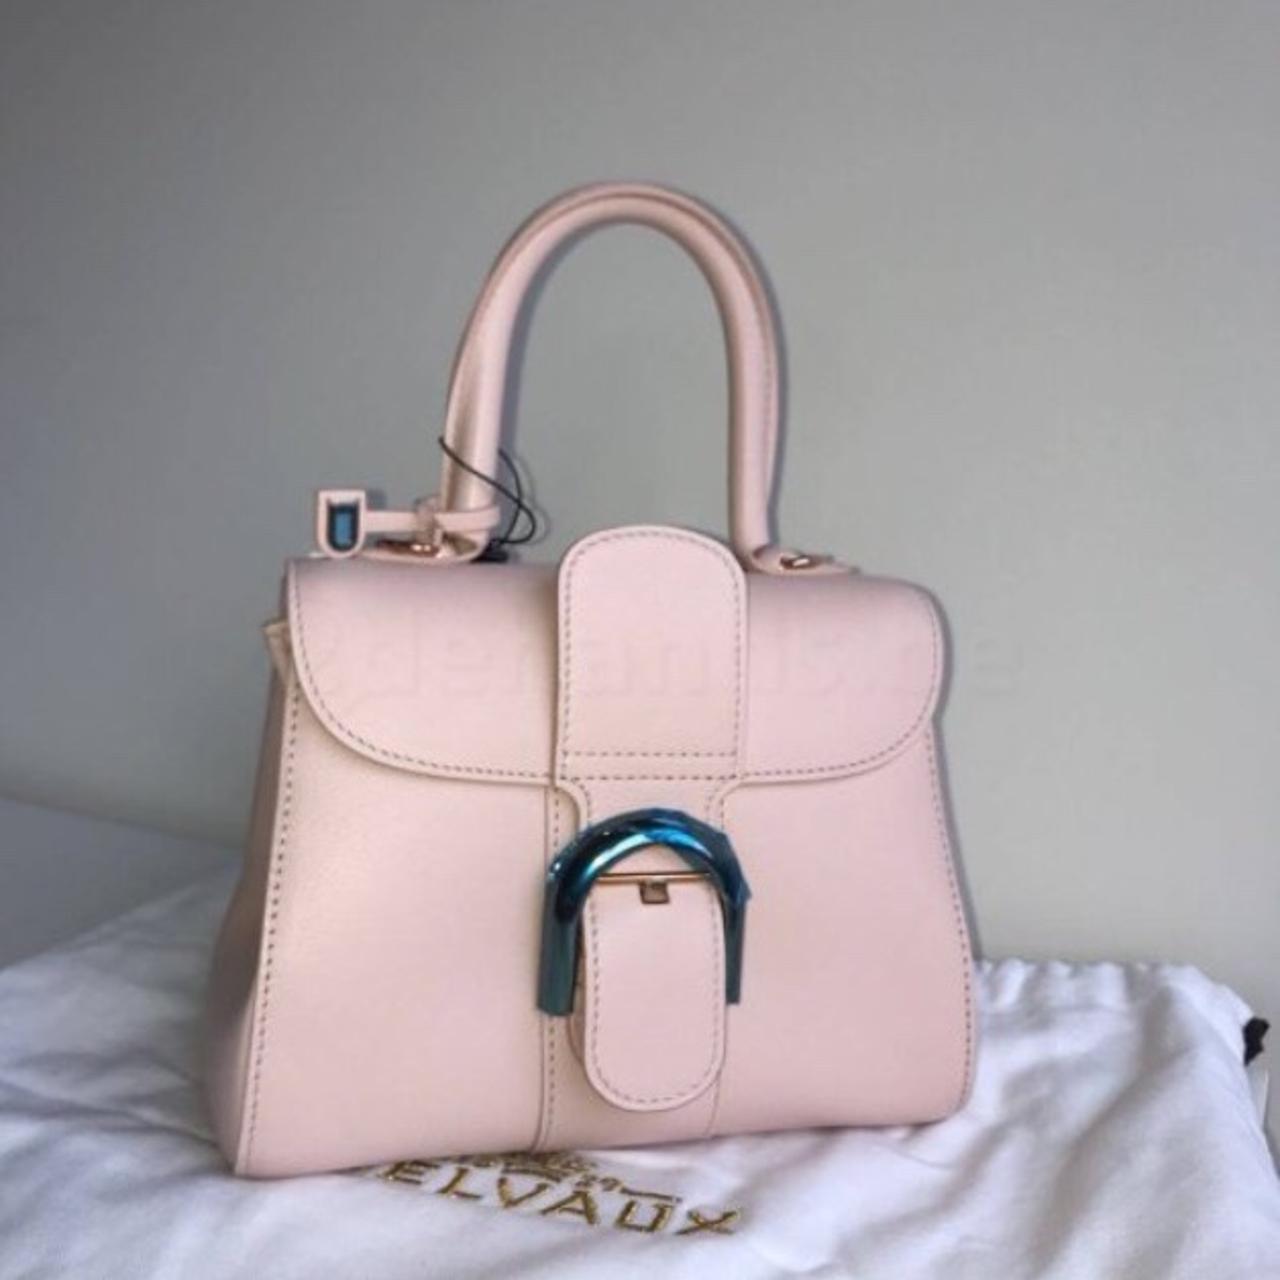 Delvaux Tempete Mini Try On, Pricing on Instagram: bstyledluxe